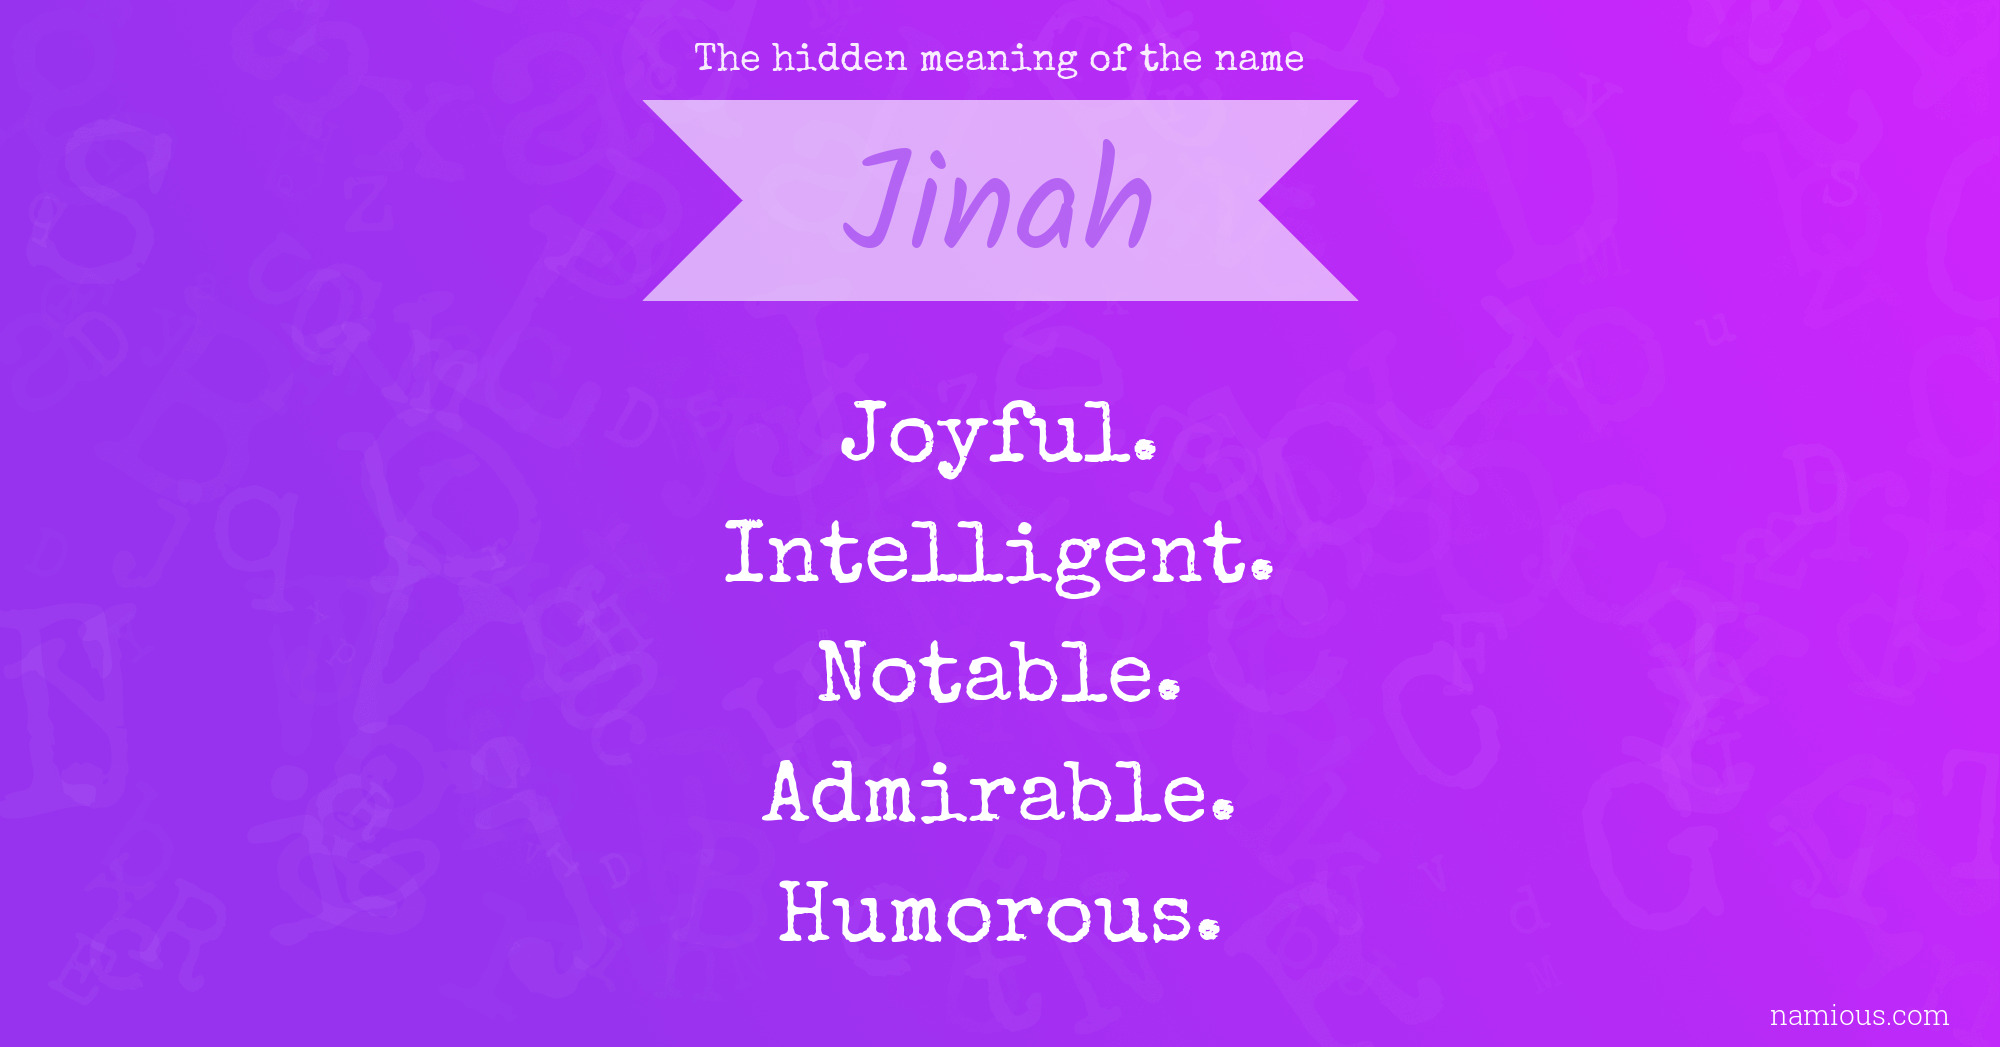 The hidden meaning of the name Jinah